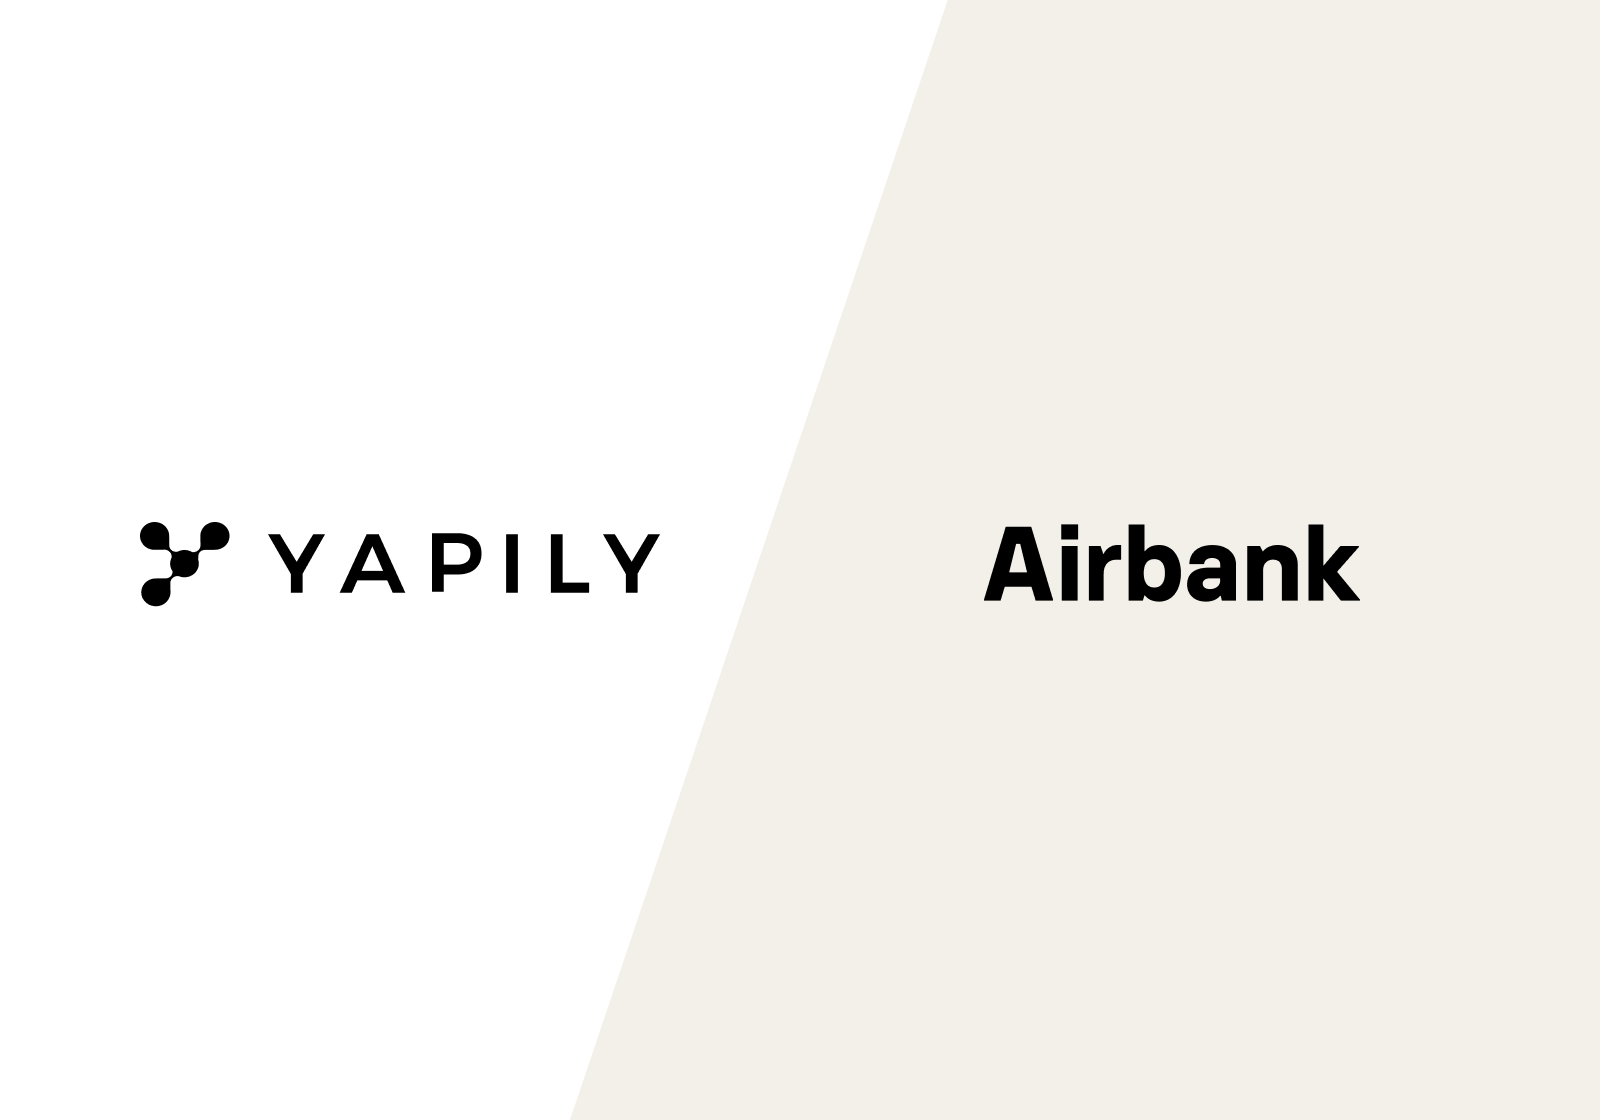 Airbank selects Yapily to build a financial management solution for SMBs